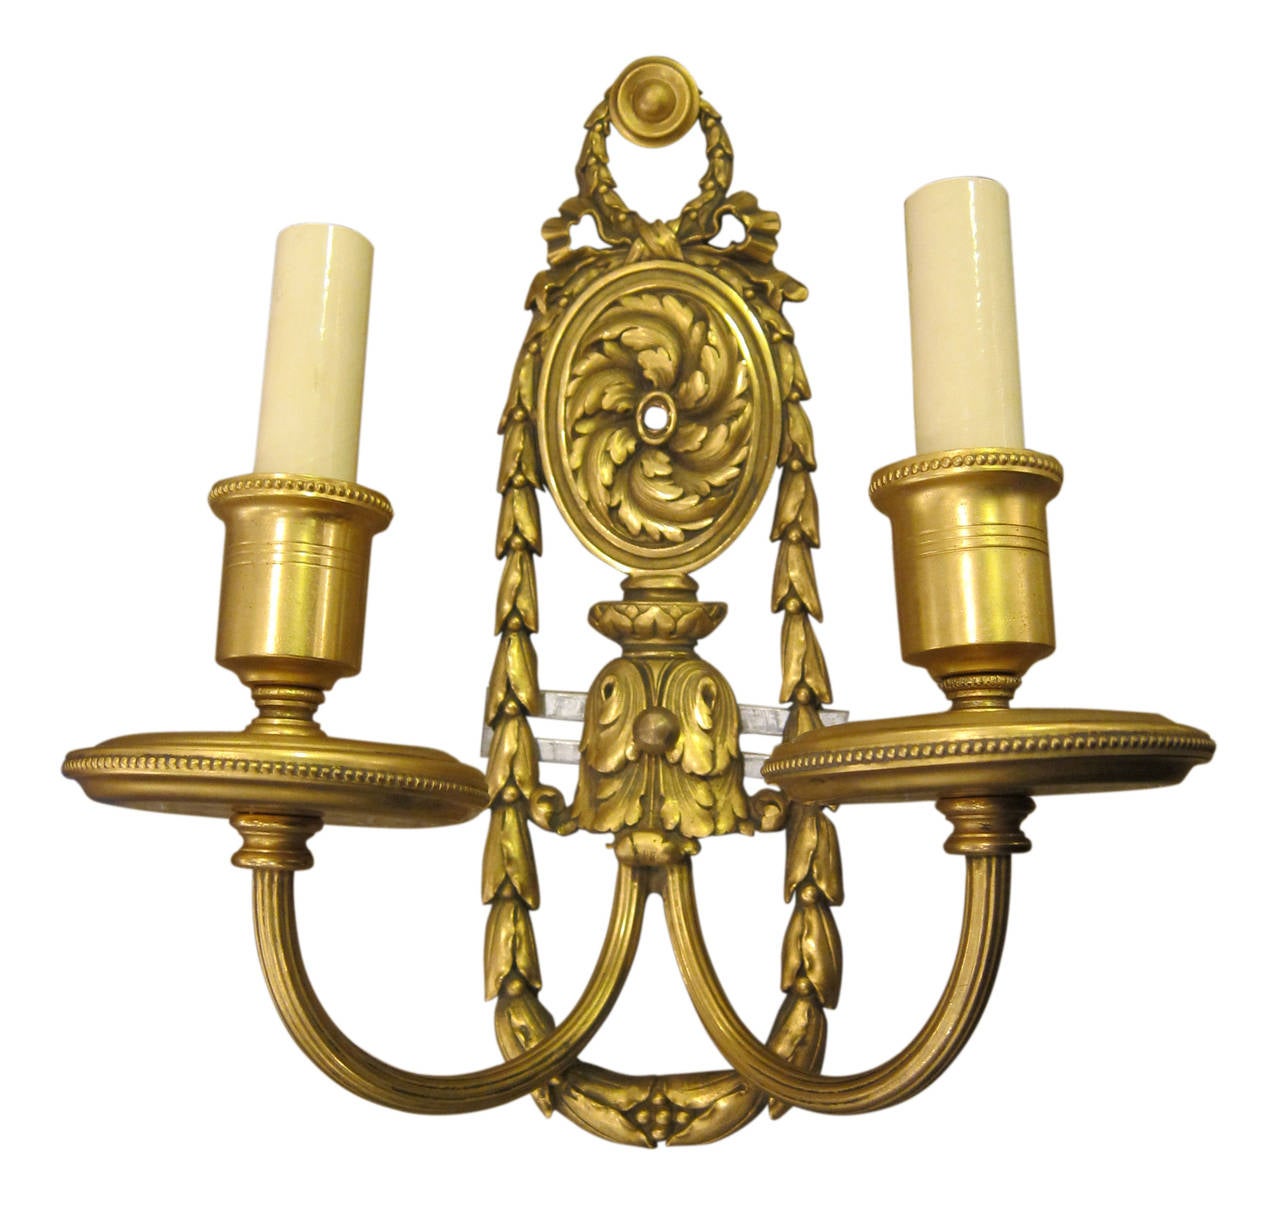 1900s pair of Louis XVI style gilded bronze sconces by E. F. Caldwell. This can be seen at our 2420 Broadway location on the upper west side in Manhattan.